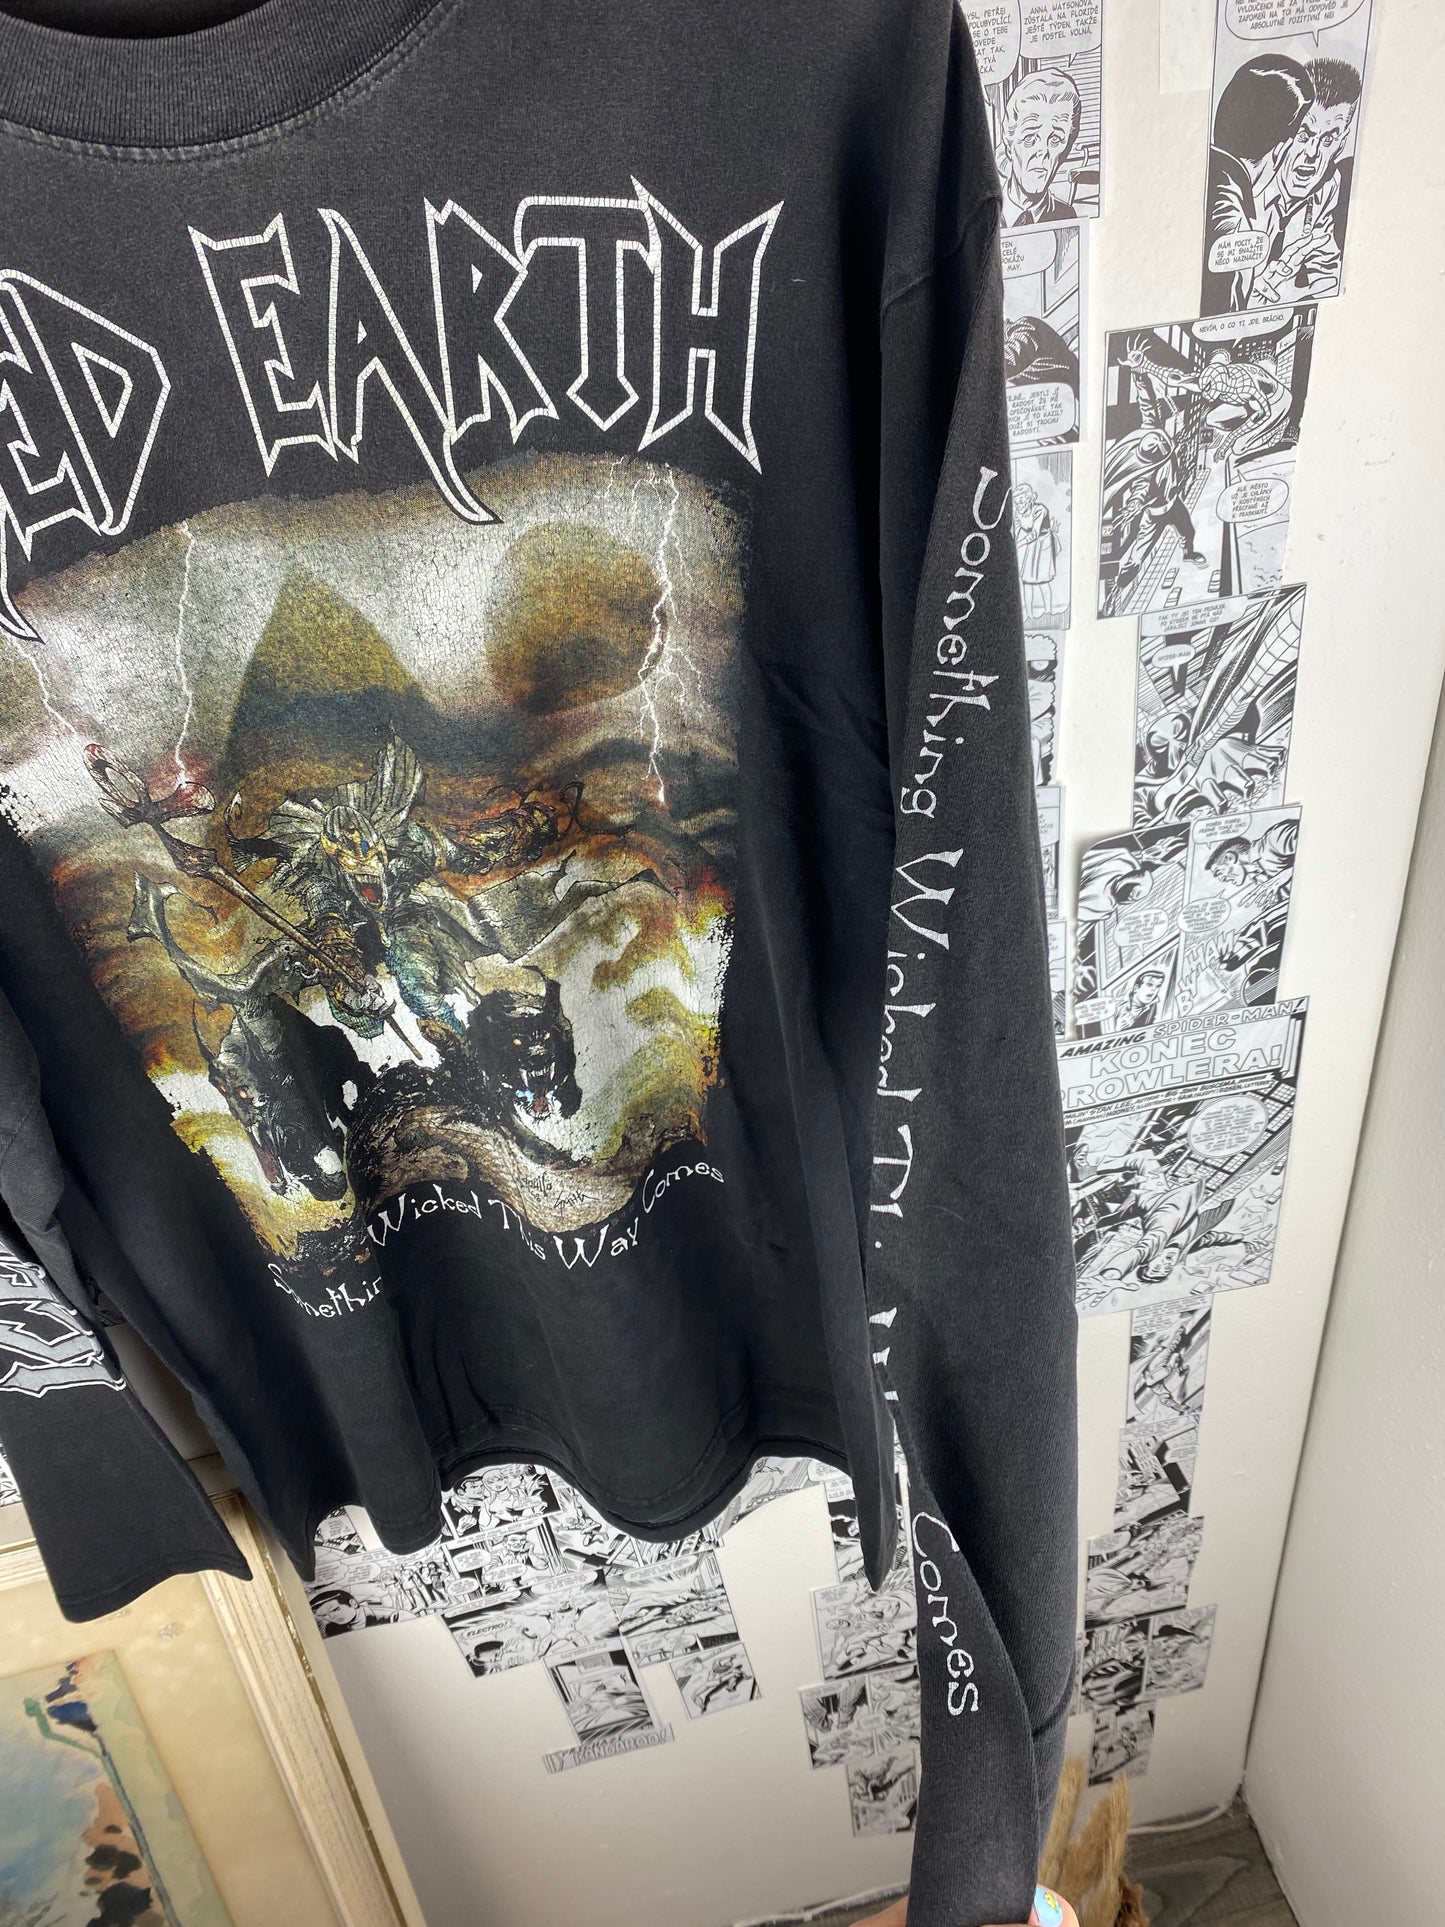 Vintage Iced Earth “Something Wicked” 90s Longsleeve t-shirt